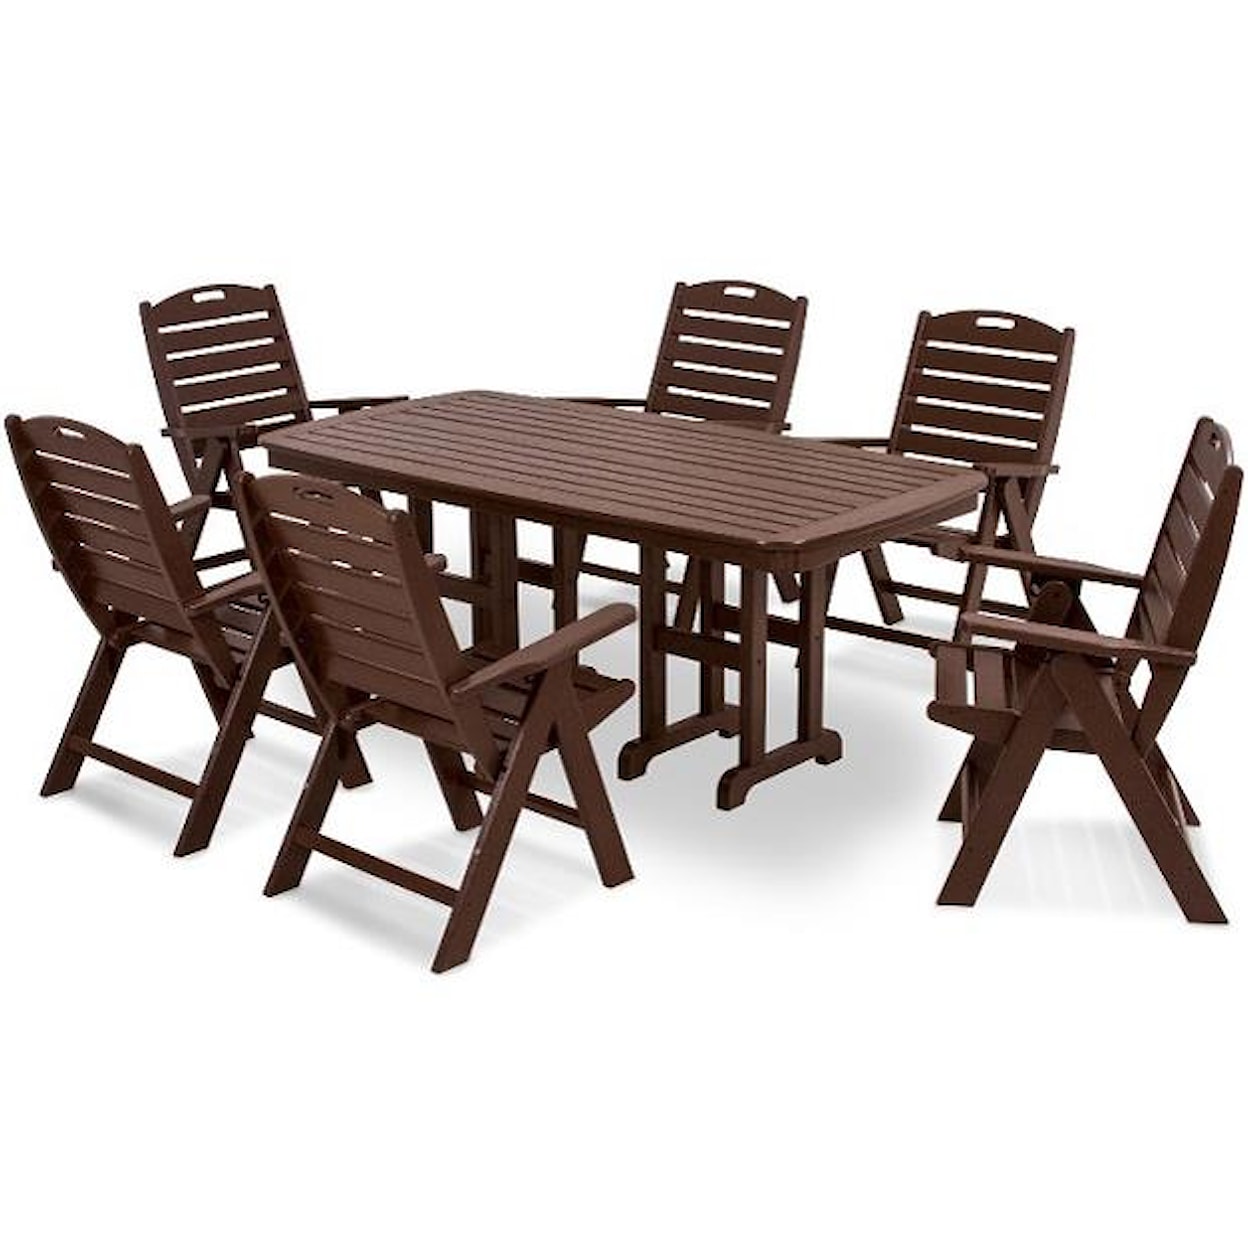 POLYWOOD Nautical Outdoor Dining Table